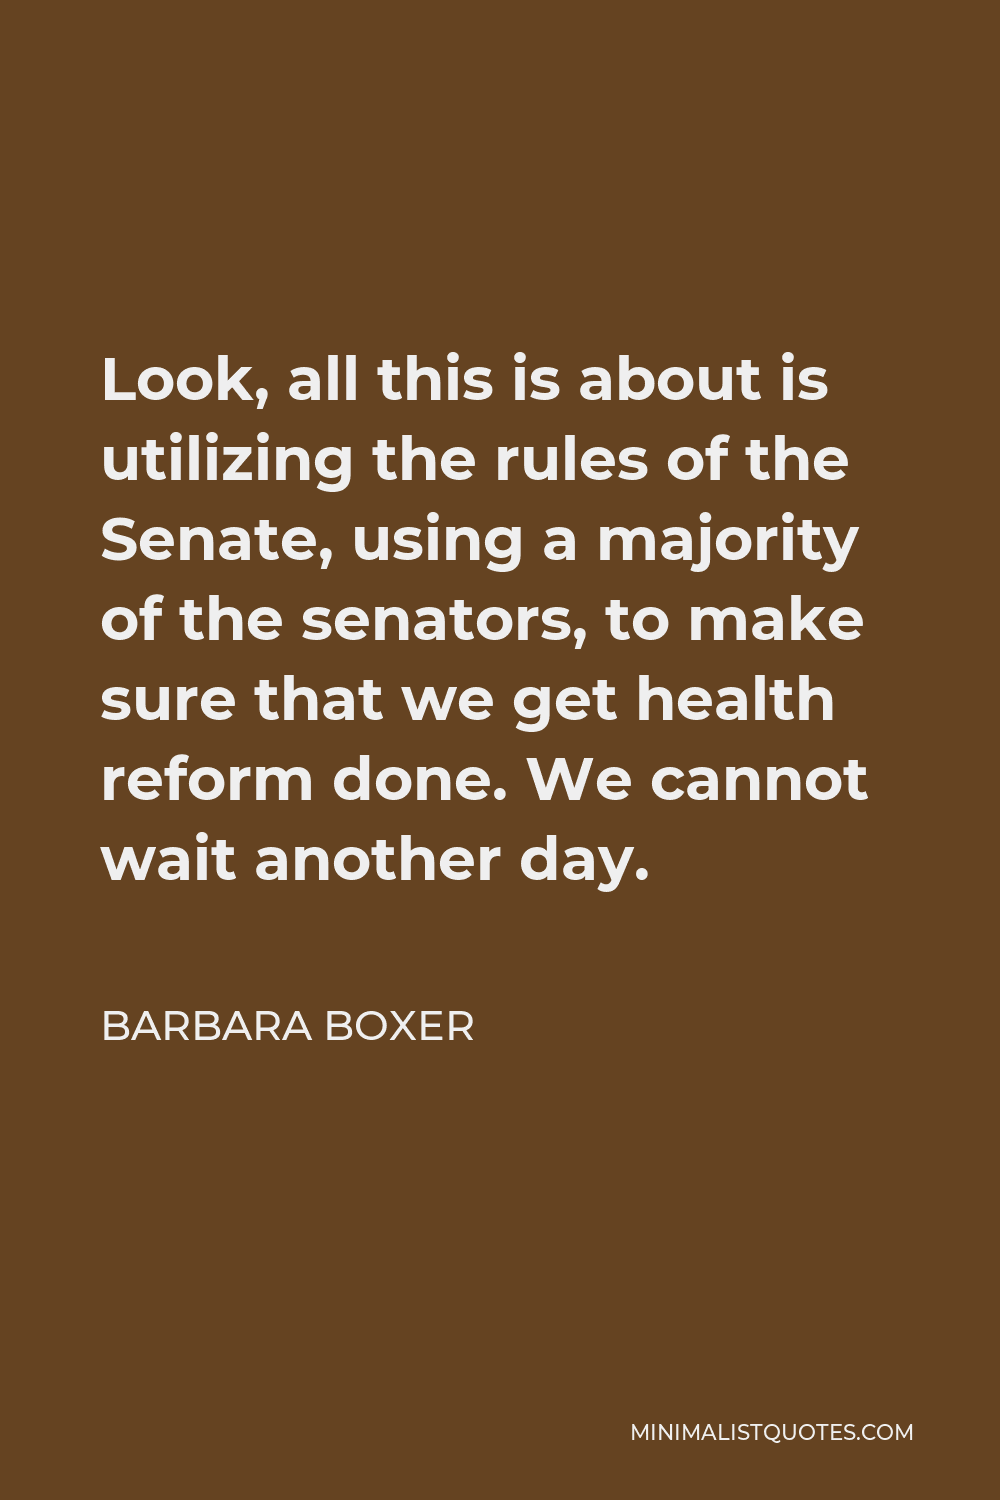 Barbara Boxer Quote - Look, all this is about is utilizing the rules of the Senate, using a majority of the senators, to make sure that we get health reform done. We cannot wait another day.